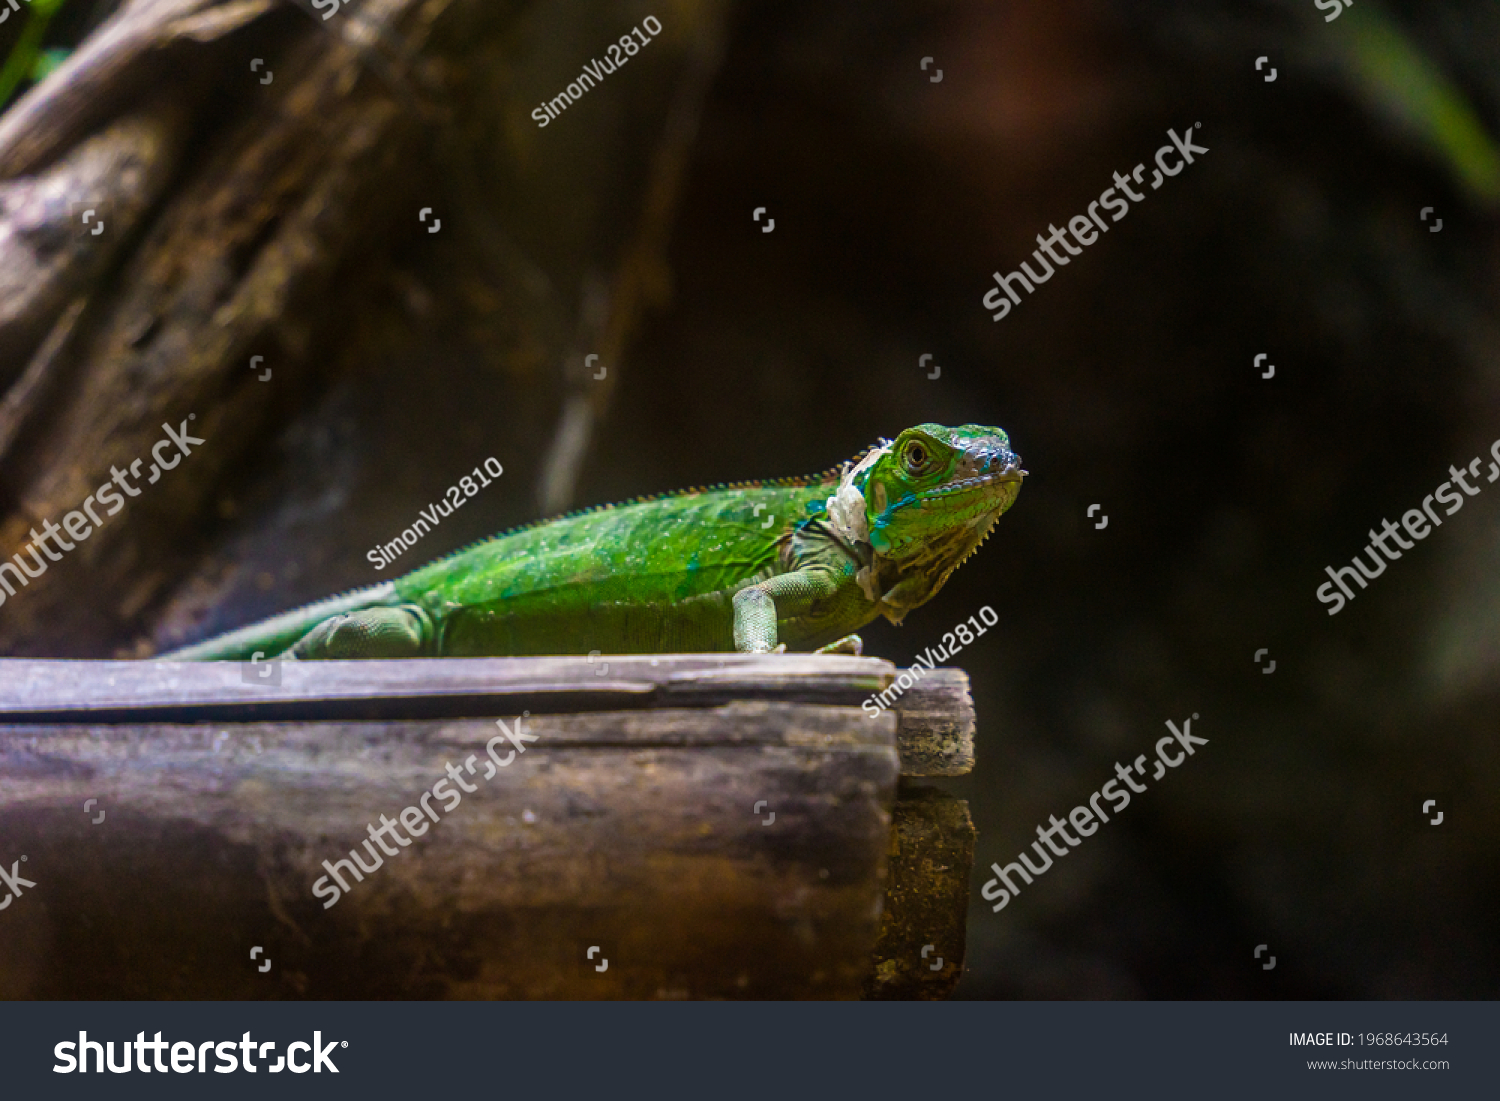 Green iguana. Iguana - also known as Common iguana or American iguana. Lizard families, look toward a bright eyes looking in the same direction as we find something new life. Selective focus. #1968643564